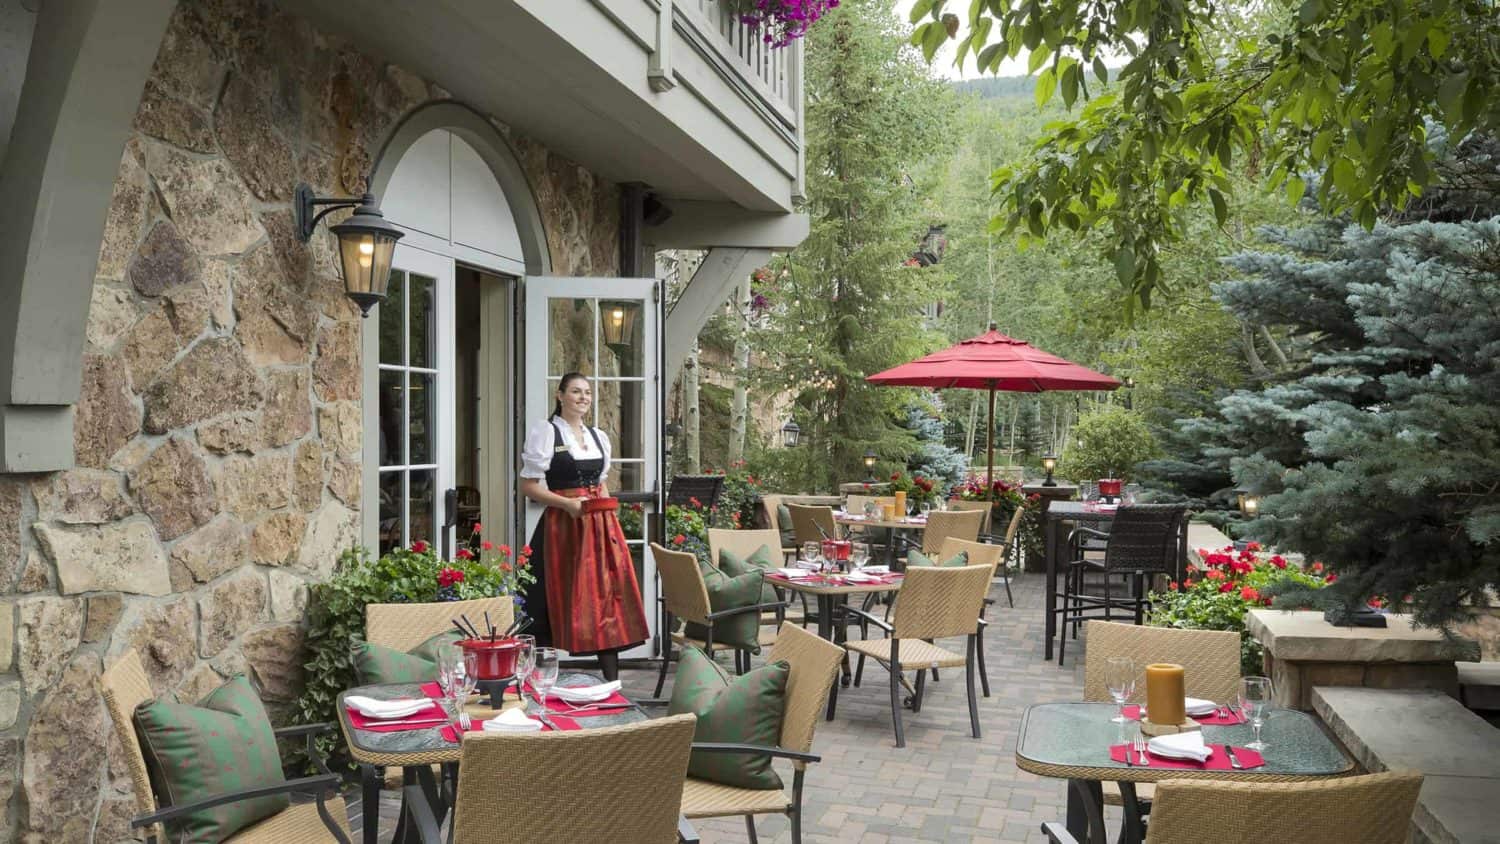 Sonnenalp Swiss Chalet outdoor patio with tables, chairs, and woman wearing dirndl carrying pot